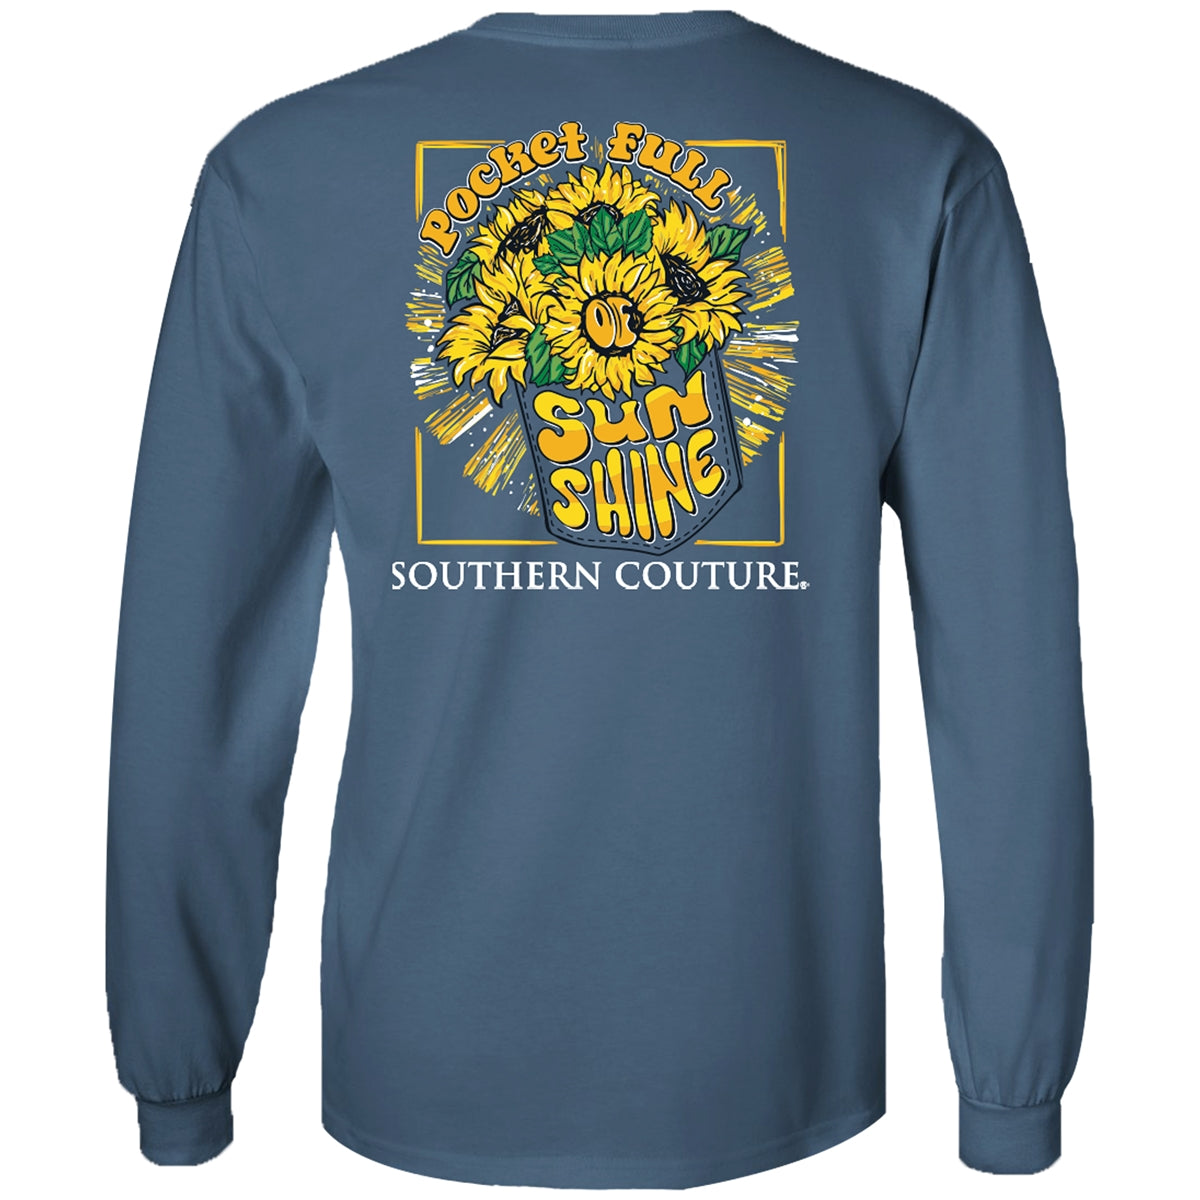 Southern Couture Classic Pocket Full of Sunshine Long Sleeve T-Shirt